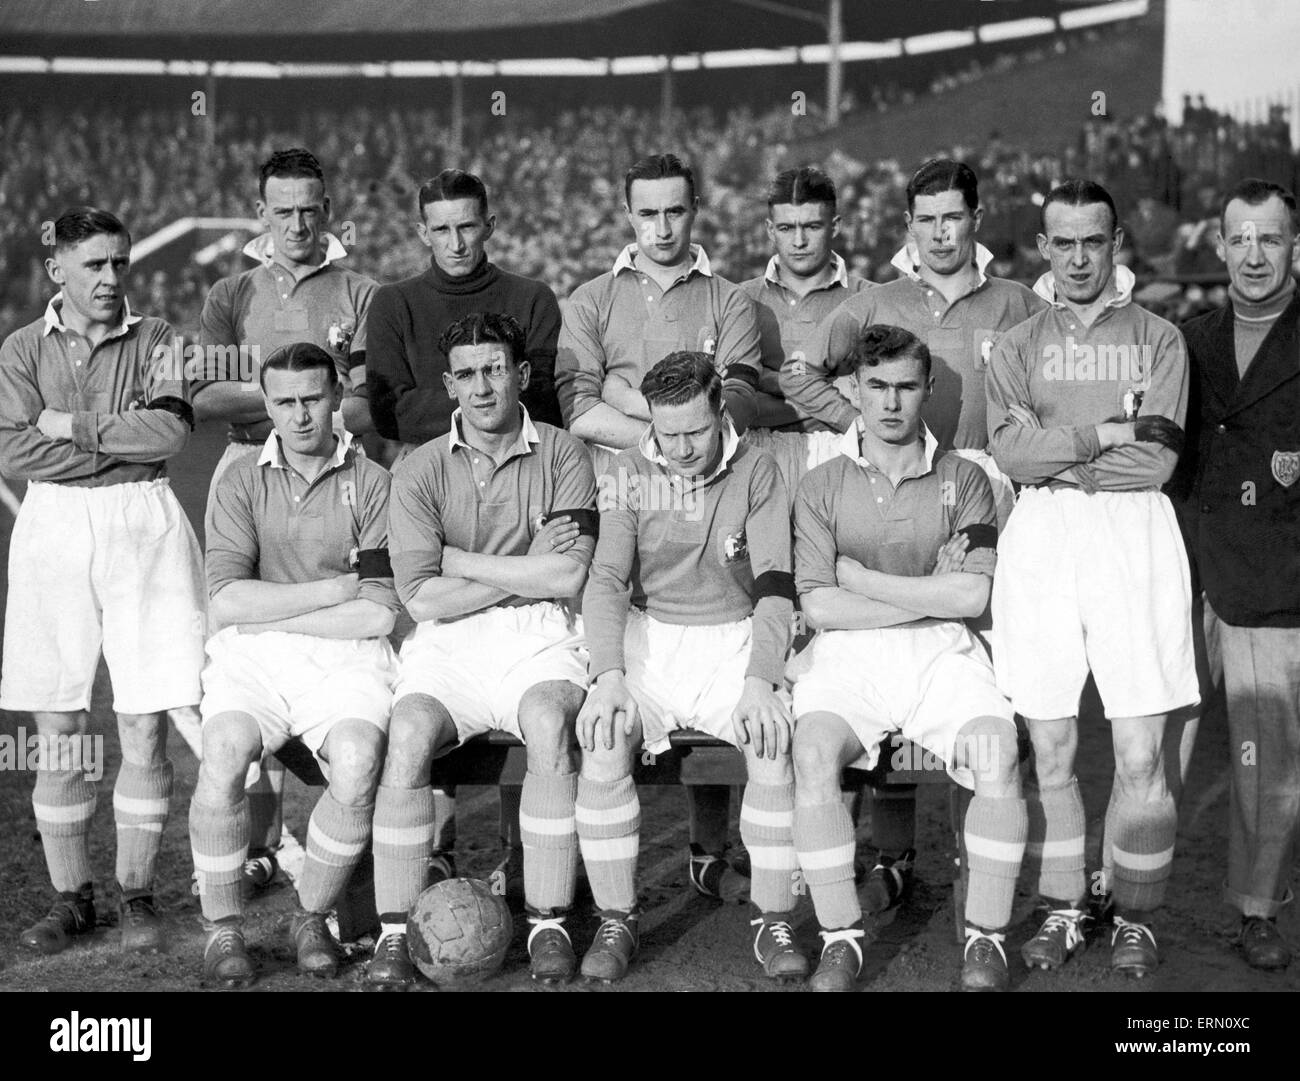 Birmingham City football club team group, February 1939. Back ro left to right: Jennings, Halsall, Clack, Sykes, Shaw, Madden, J Brown, W Gibson (trainer). Front row: Craven, Hughes, Jones and Bye. Stock Photo